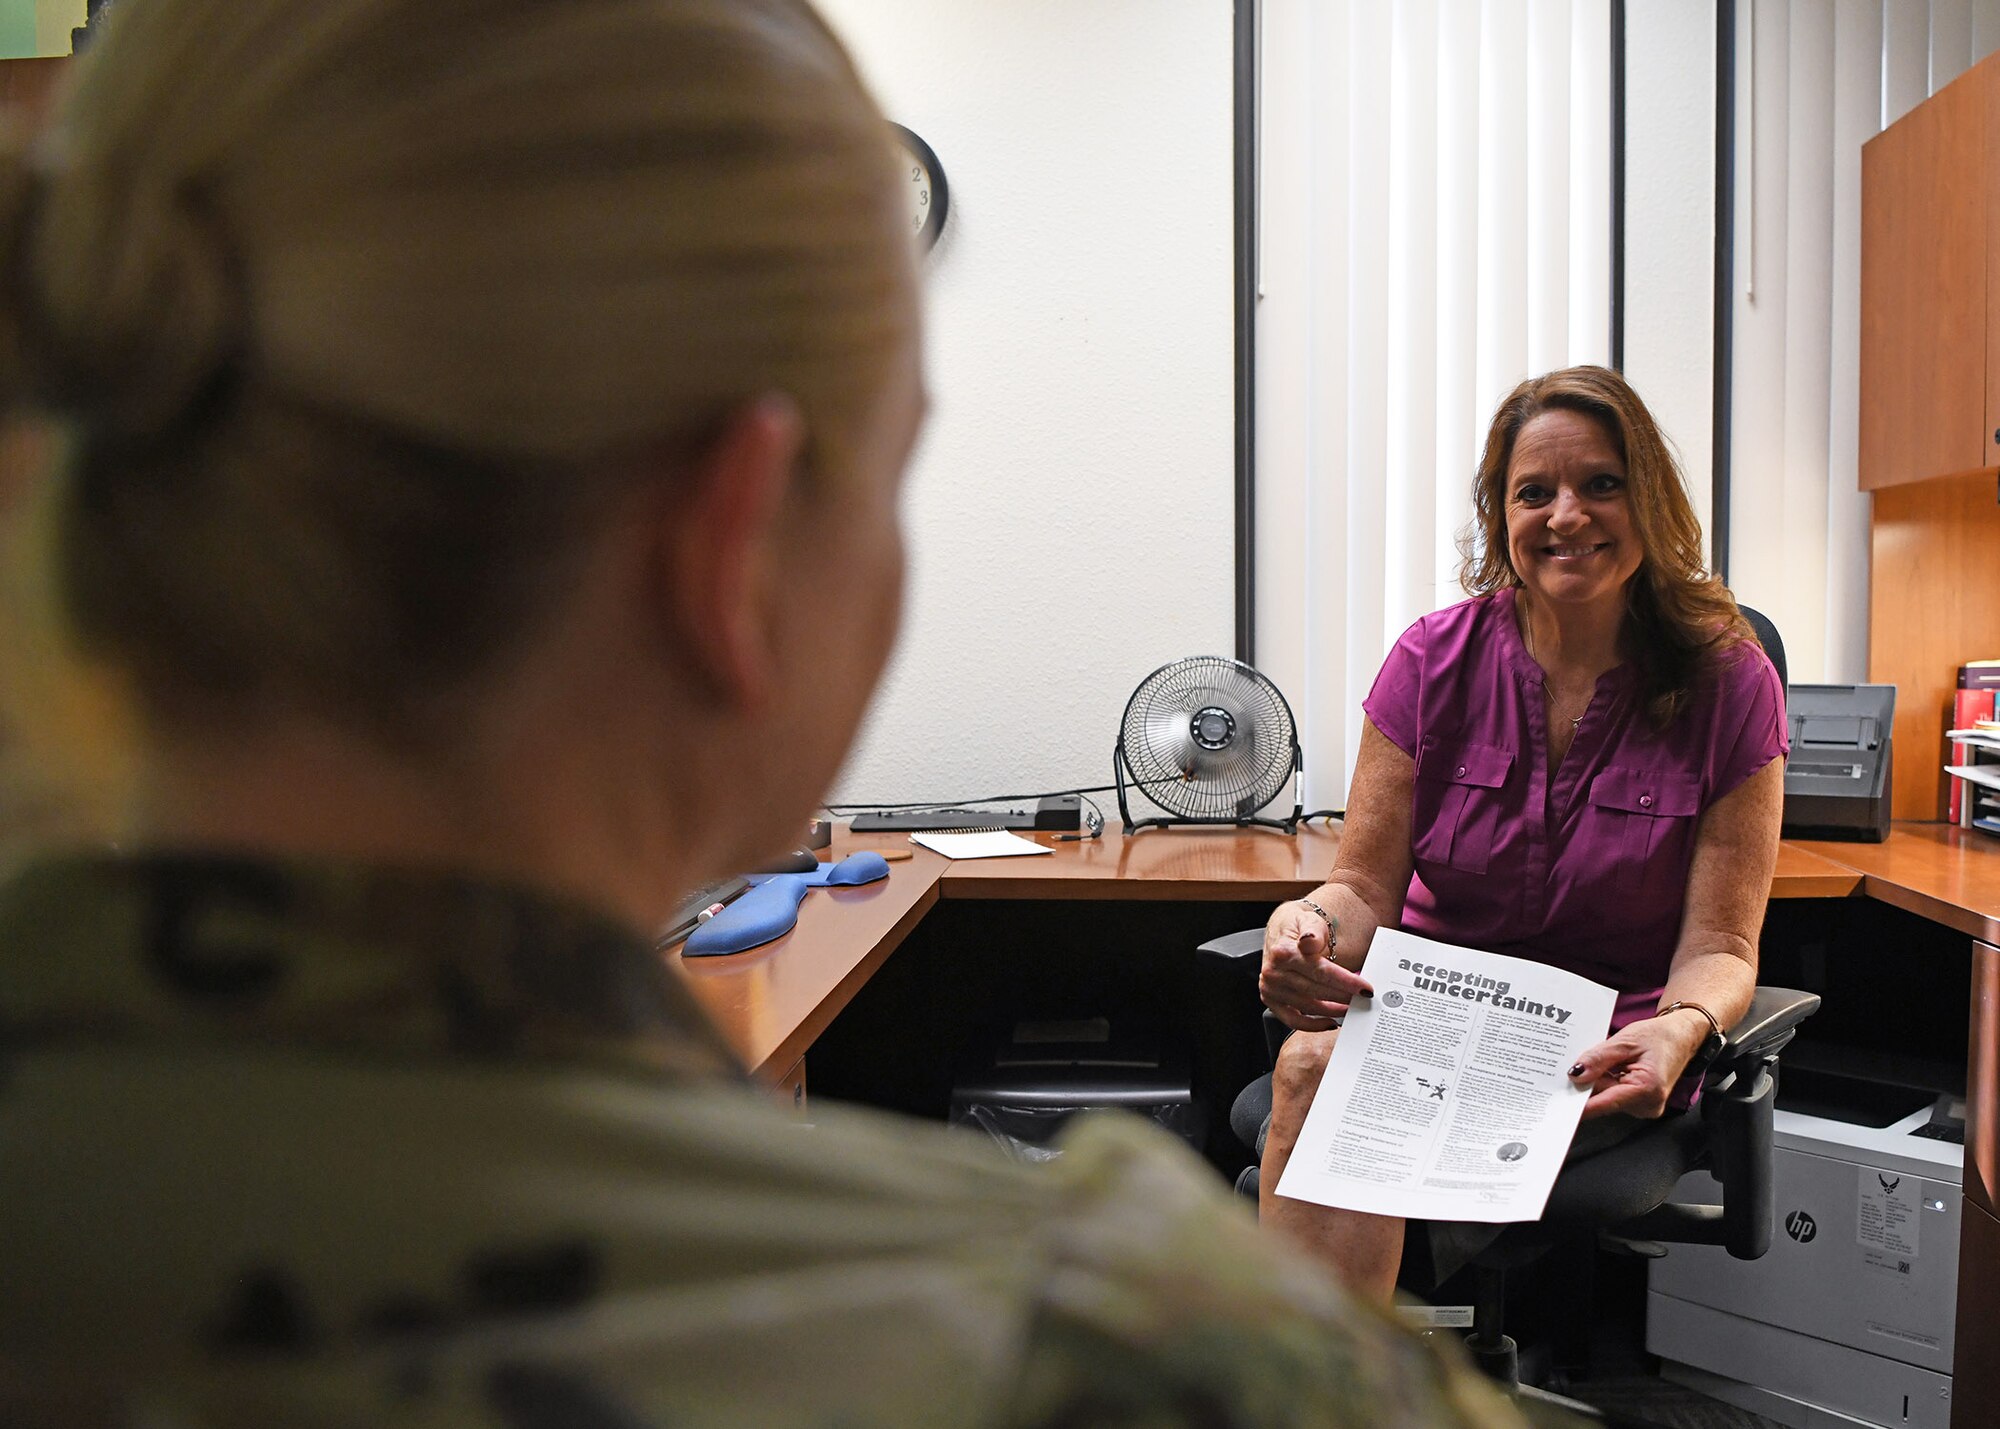 As Airmen, change is constant and often requires immediate transitions with limited flexibility.  When thinking about change, understand that often times, doors close so others can open.